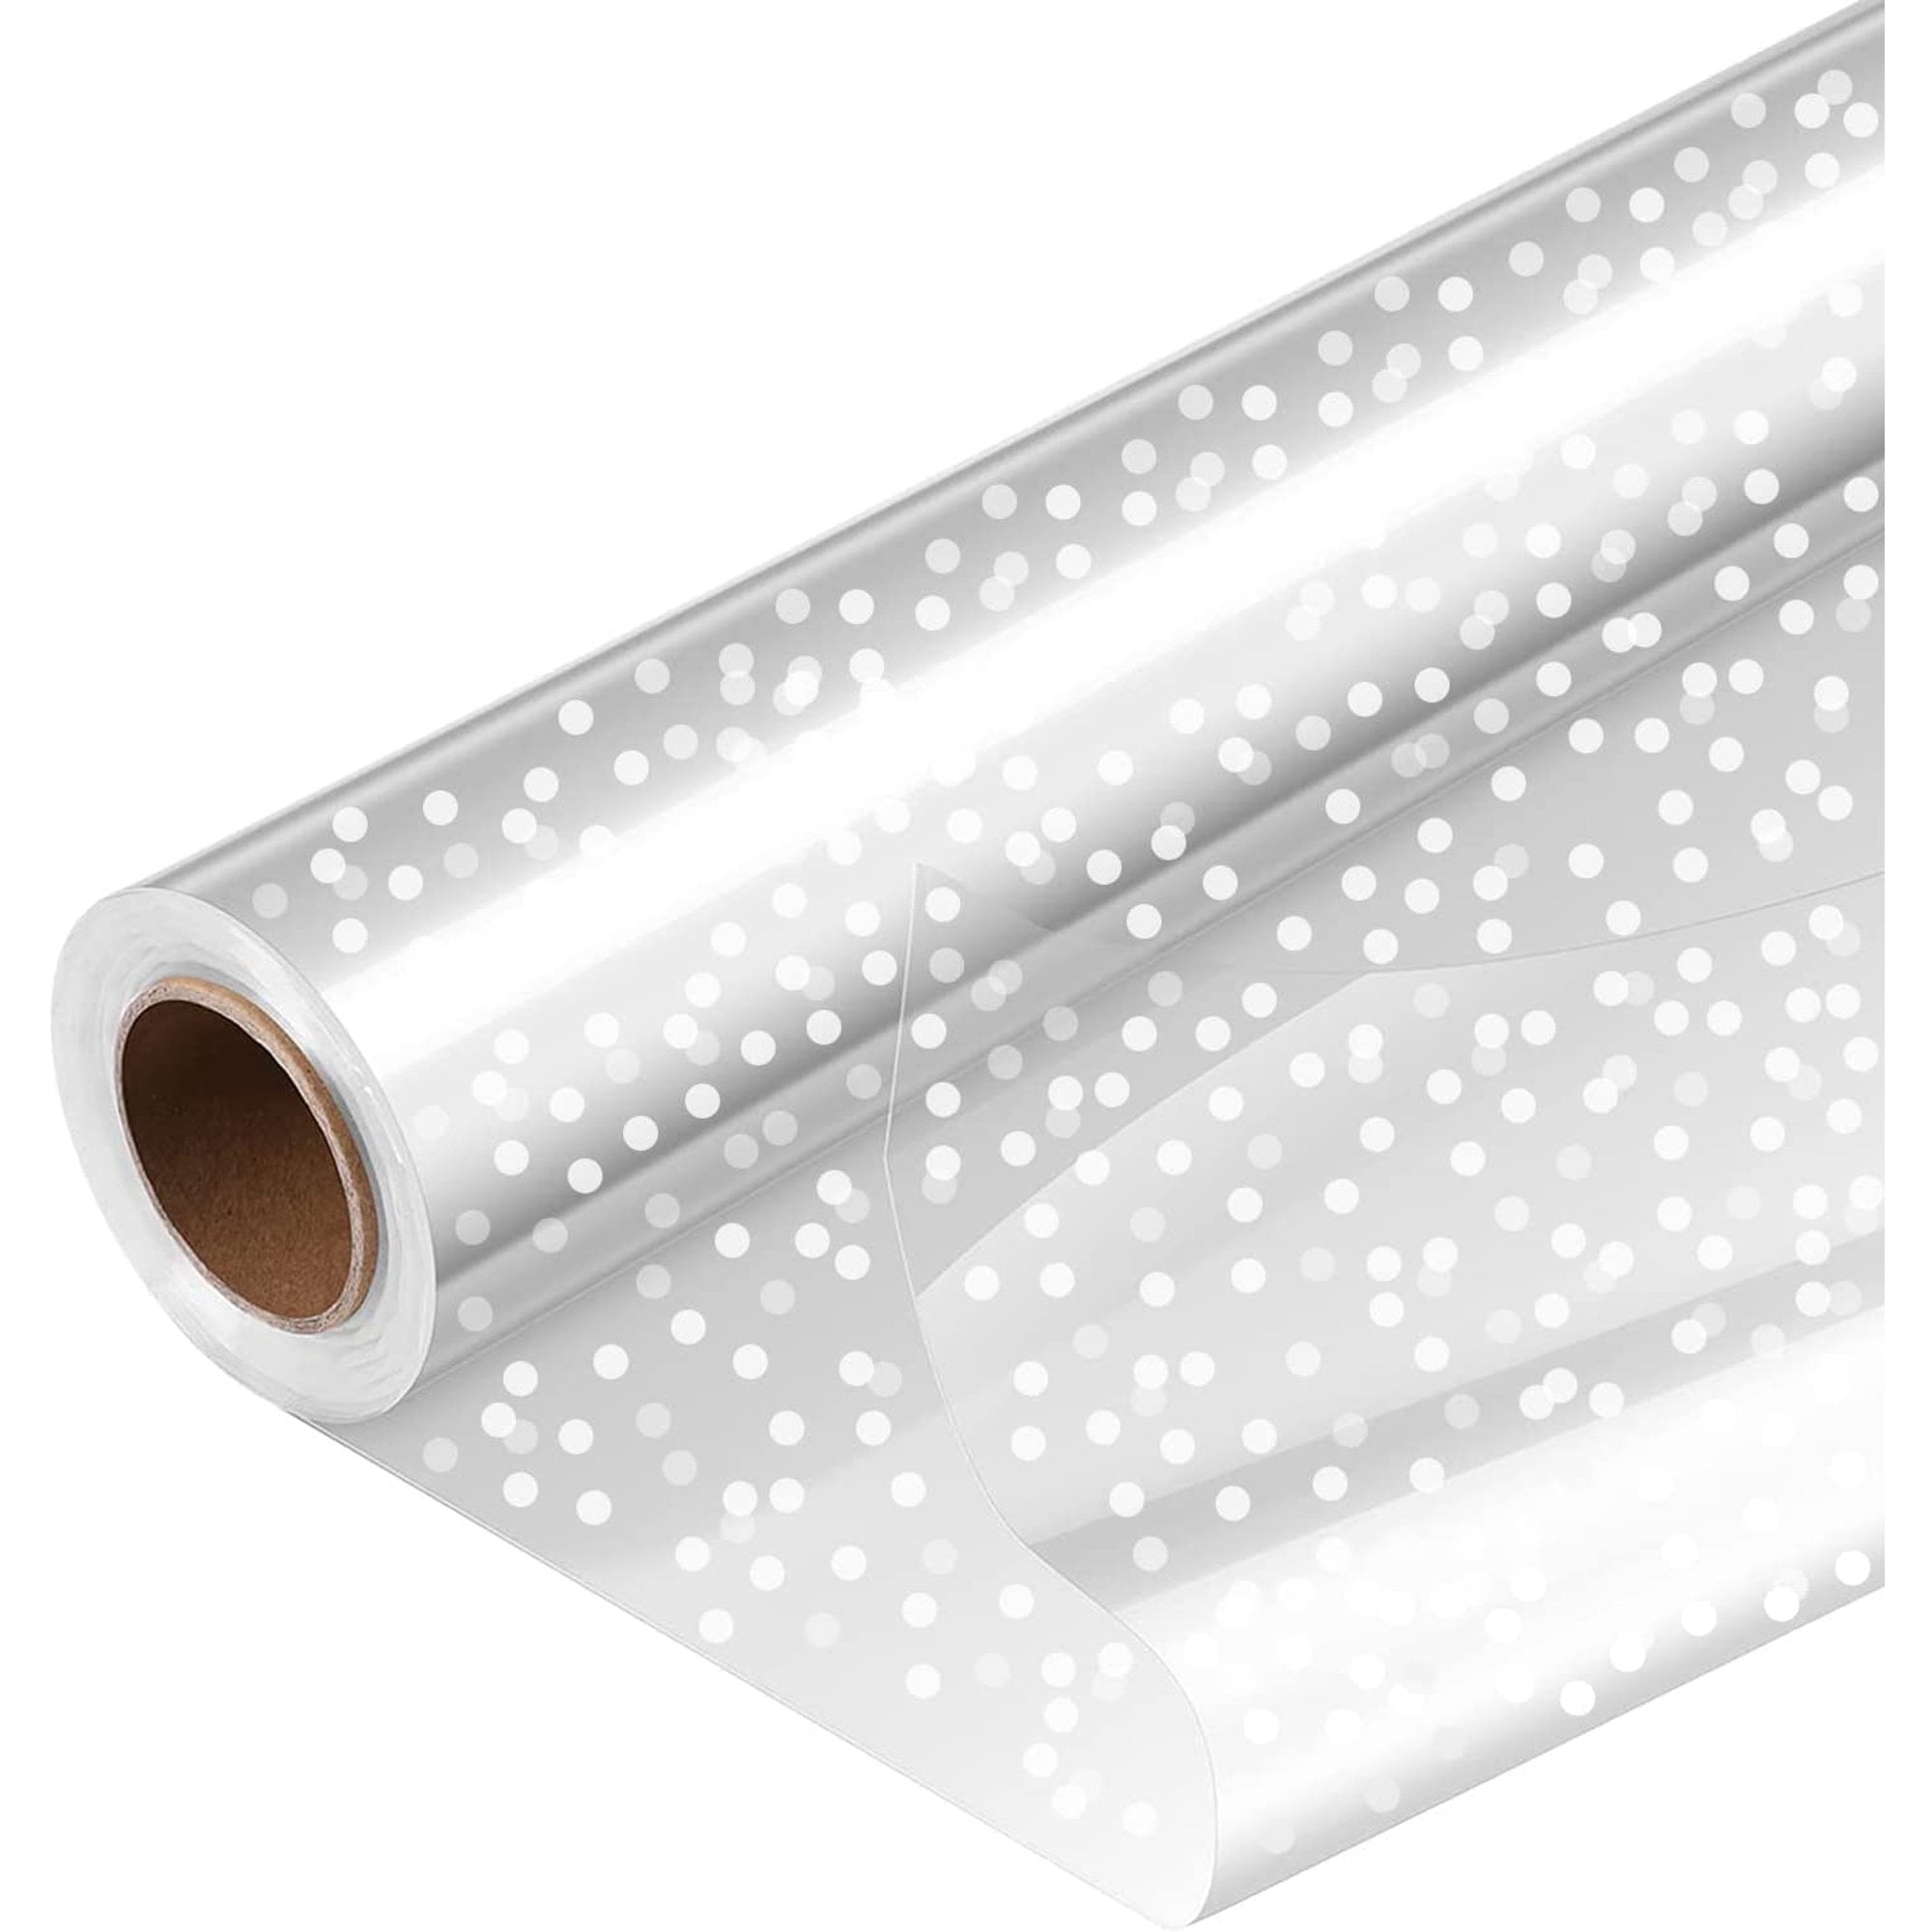 Unique Bargains Clear Flower Wrapping Paper 98ft x 16in Wrap Roll Gift  Wrapping 2.5 Mil Thick Film Red Polka Dots